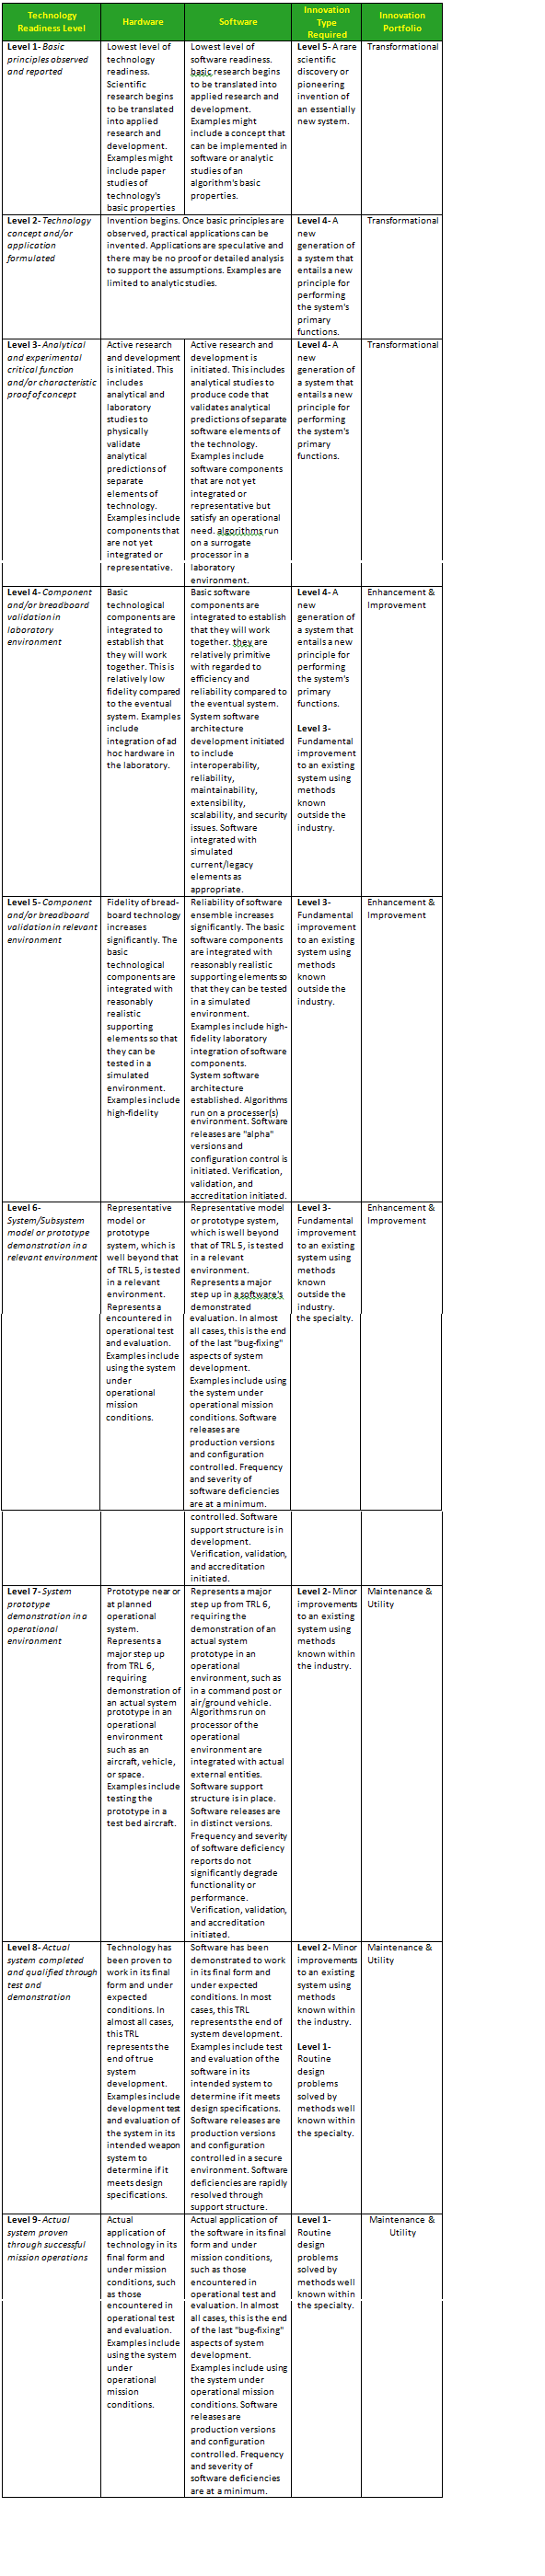 Technology Readiness and Innovation Alignment Table